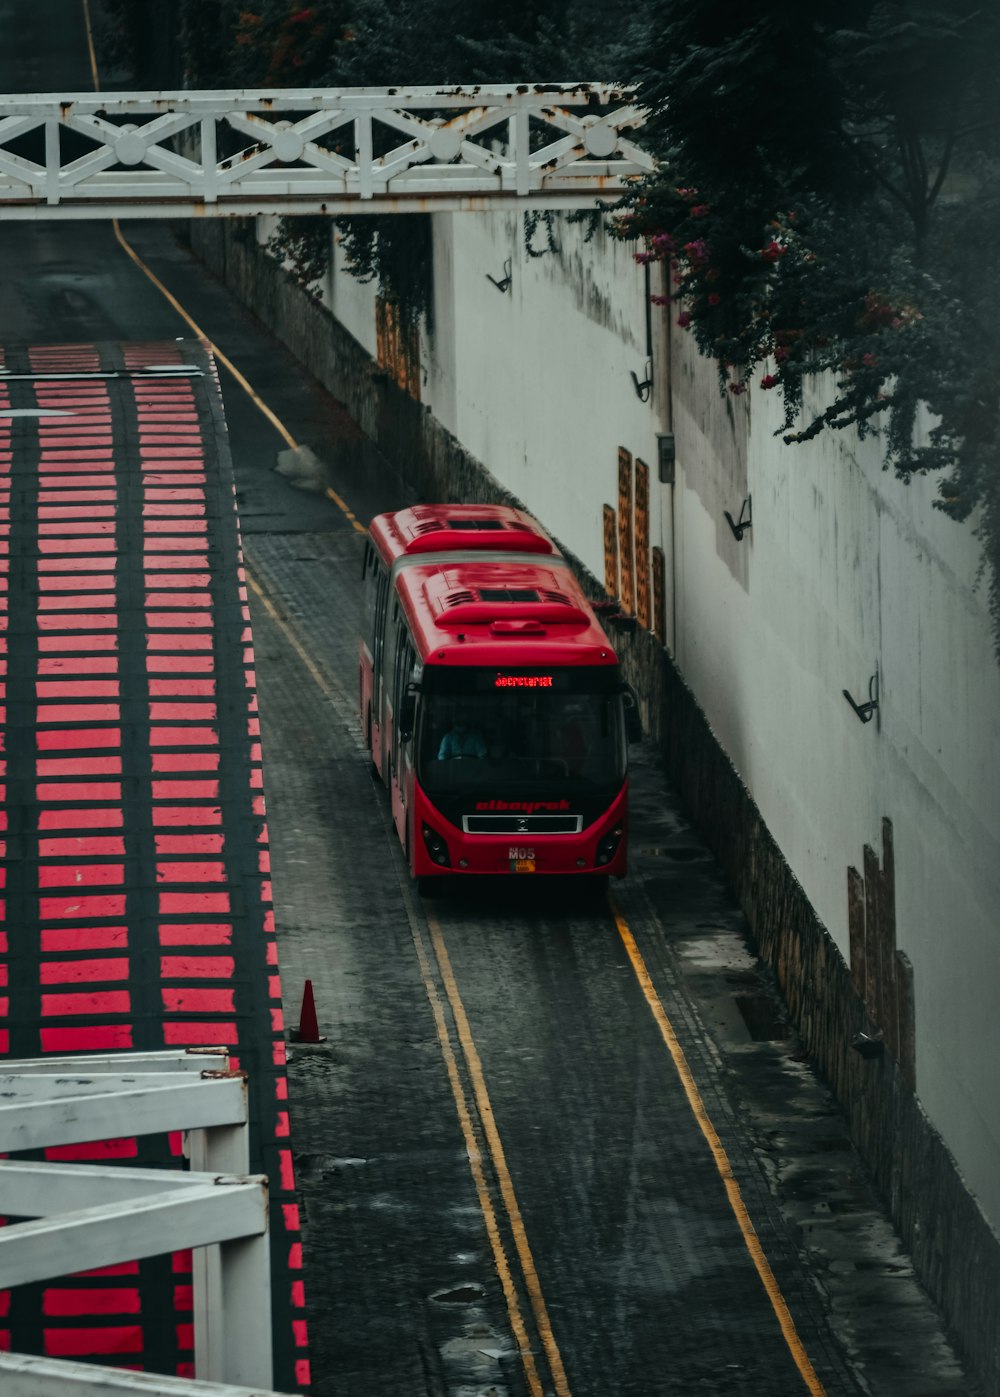 red and black bus on road during daytime